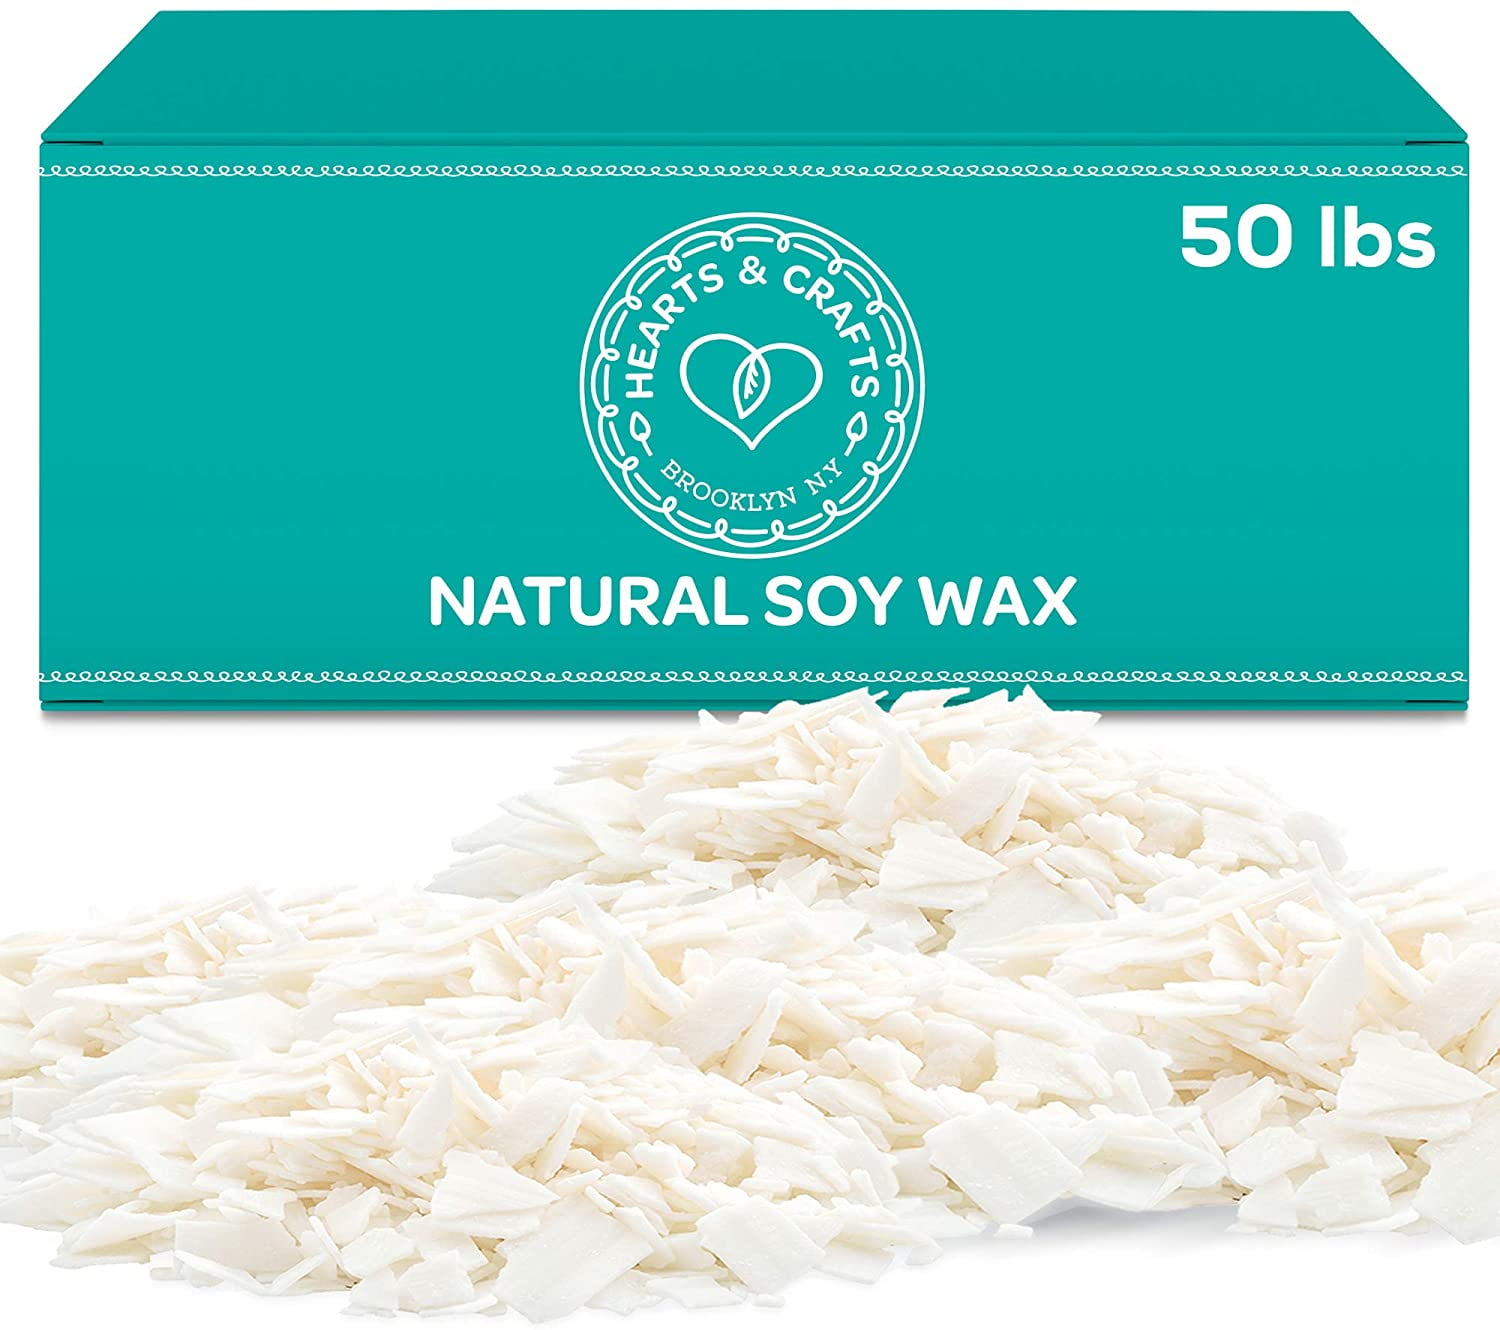 NO ADDITIVES 100%  PURE SOY WAX 1LB FLAKES FOR CANDLE MAKING SUPPLIES 